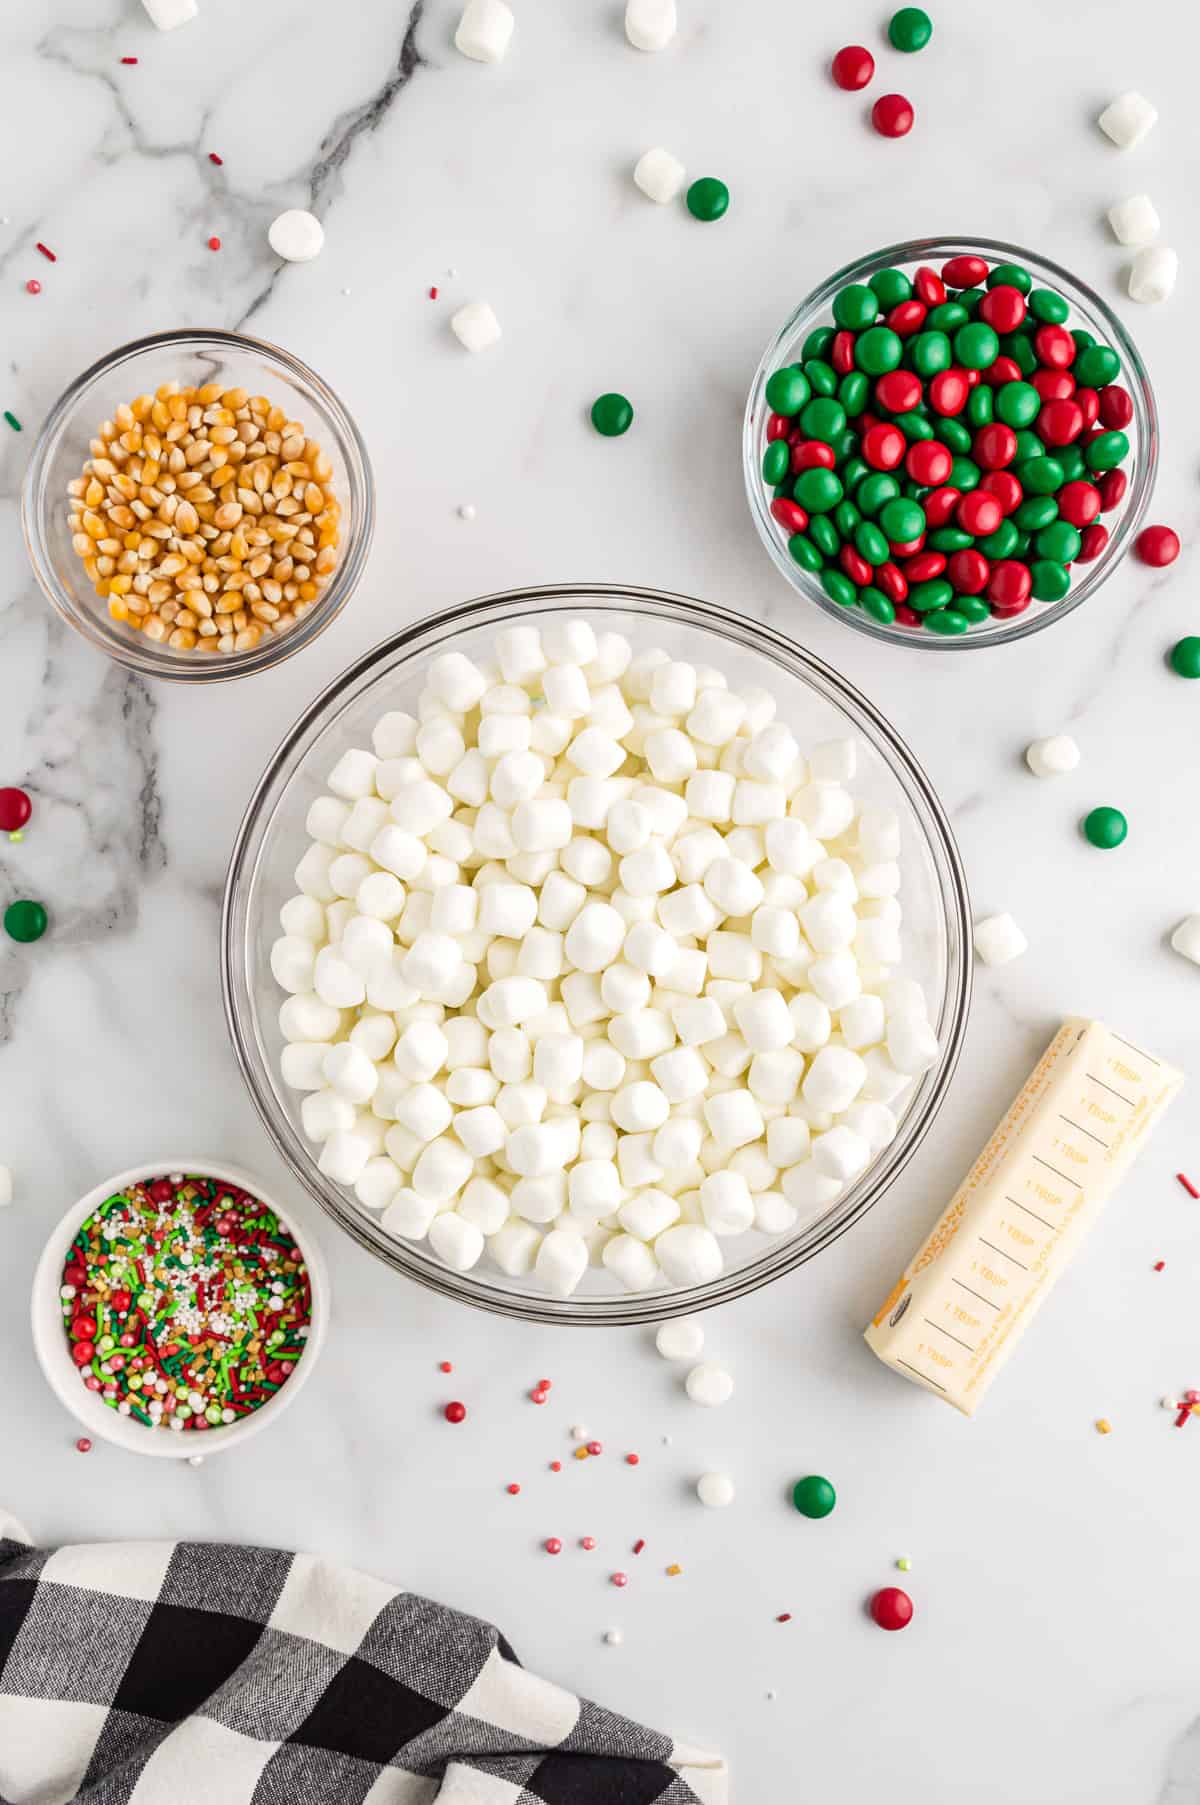 bowl of unpopped popcorn kernels, bowl of mini marshmallows, bowl of red and green chocolate candies, stick of butter, bowl of sptinkles